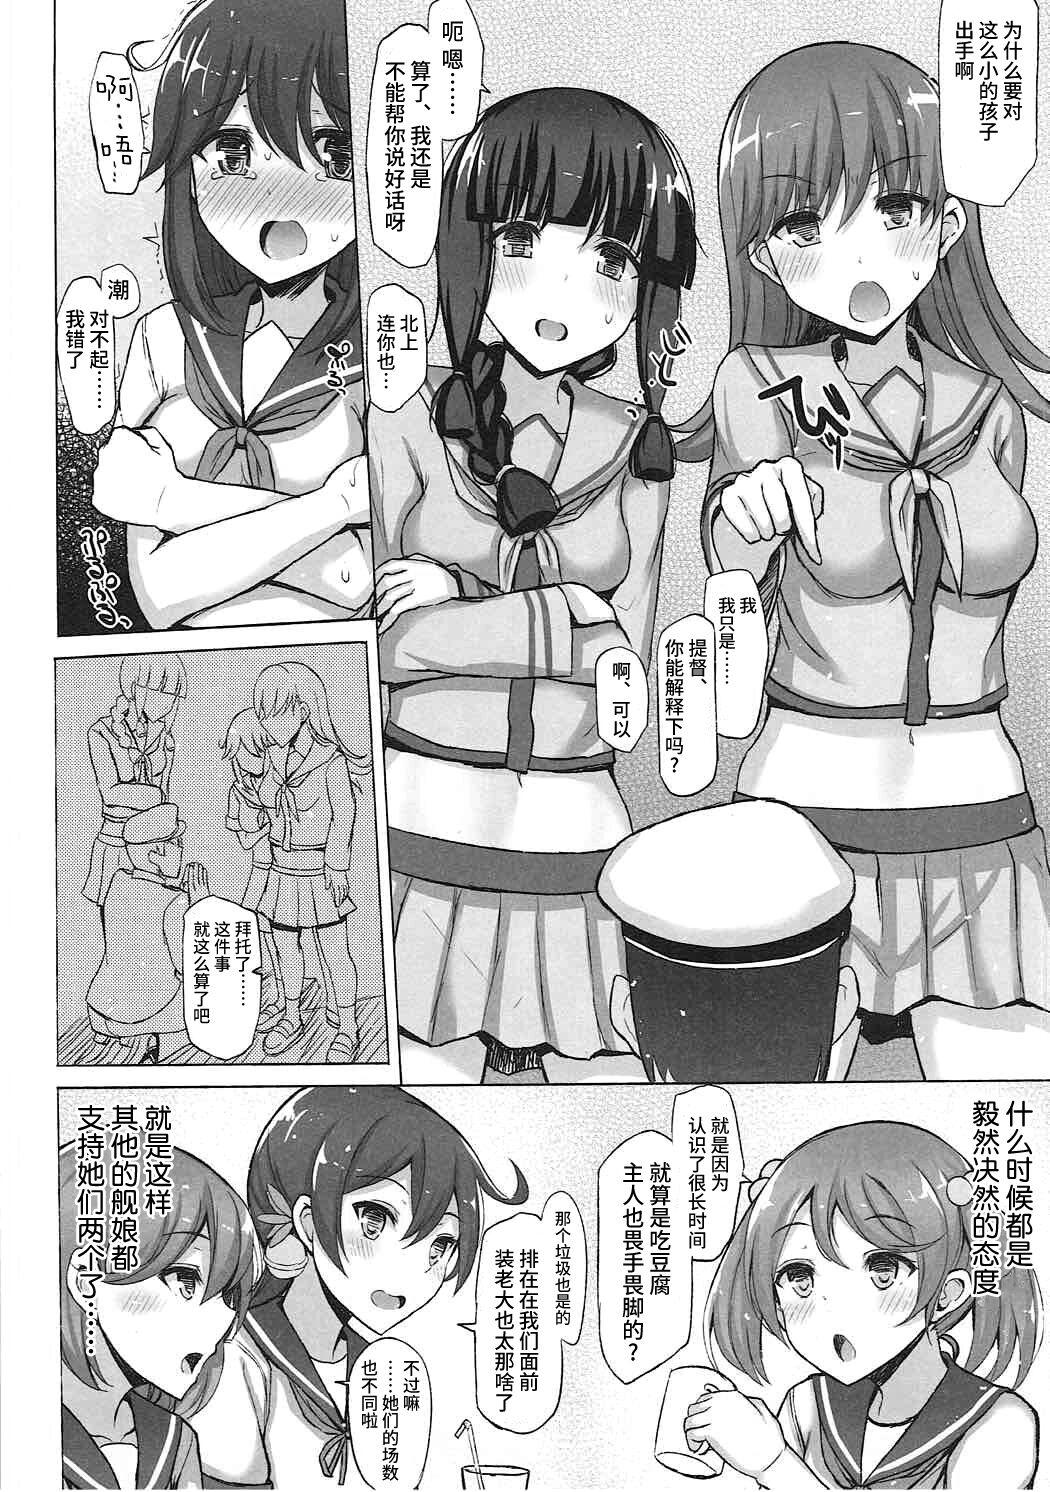 Cdzinha AS YOU ARE. - Kantai collection Stepsiblings - Page 3